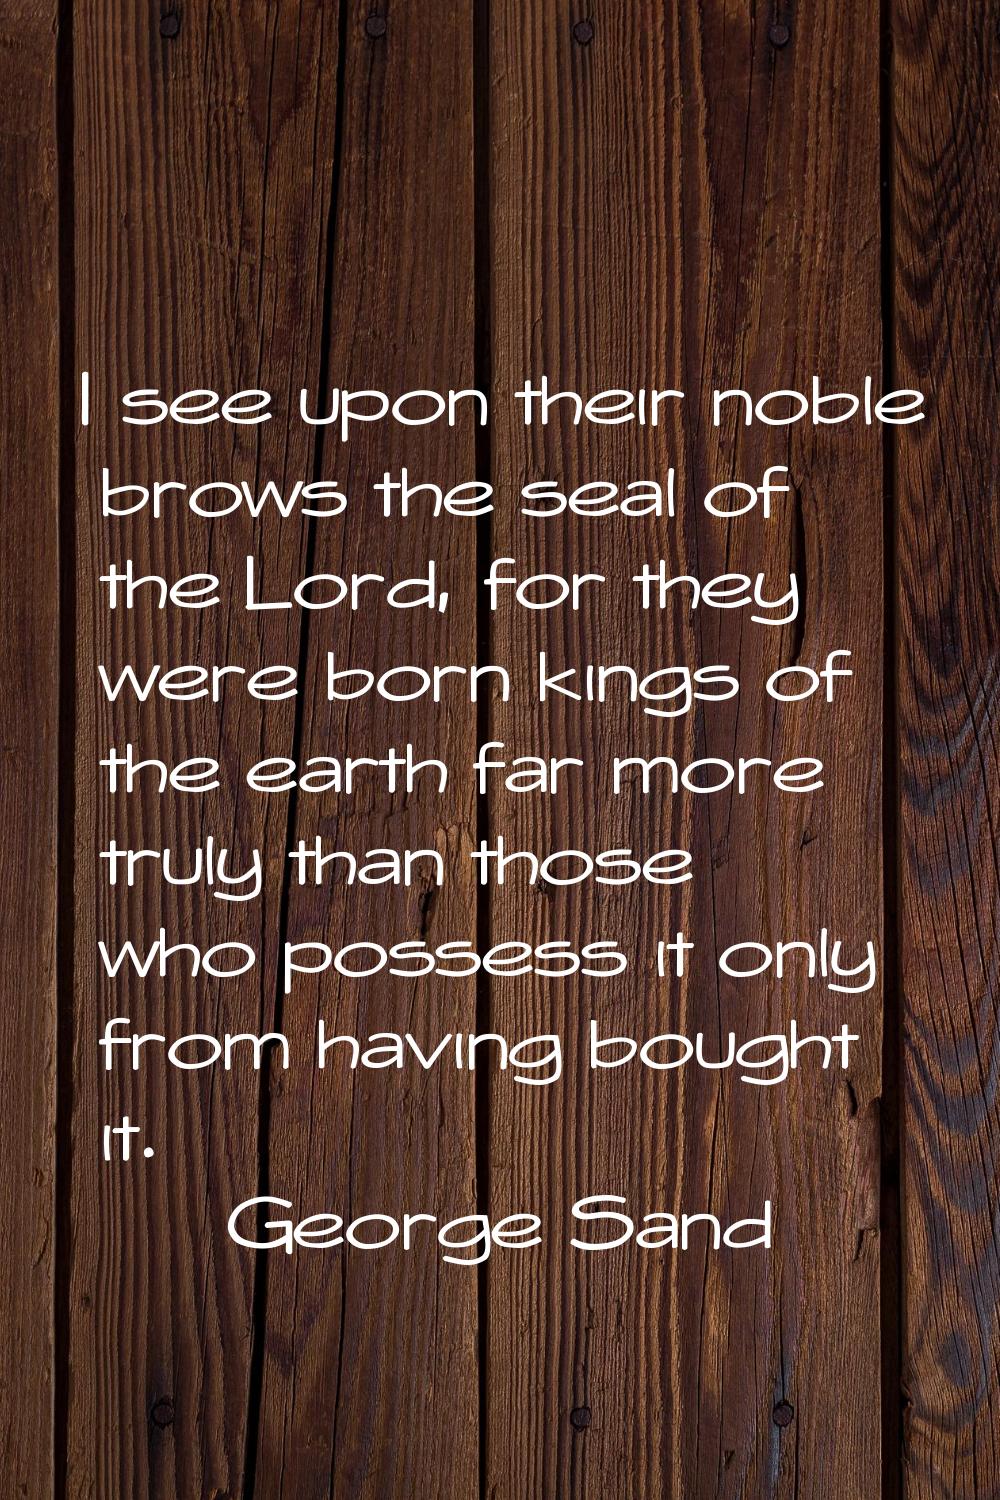 I see upon their noble brows the seal of the Lord, for they were born kings of the earth far more t